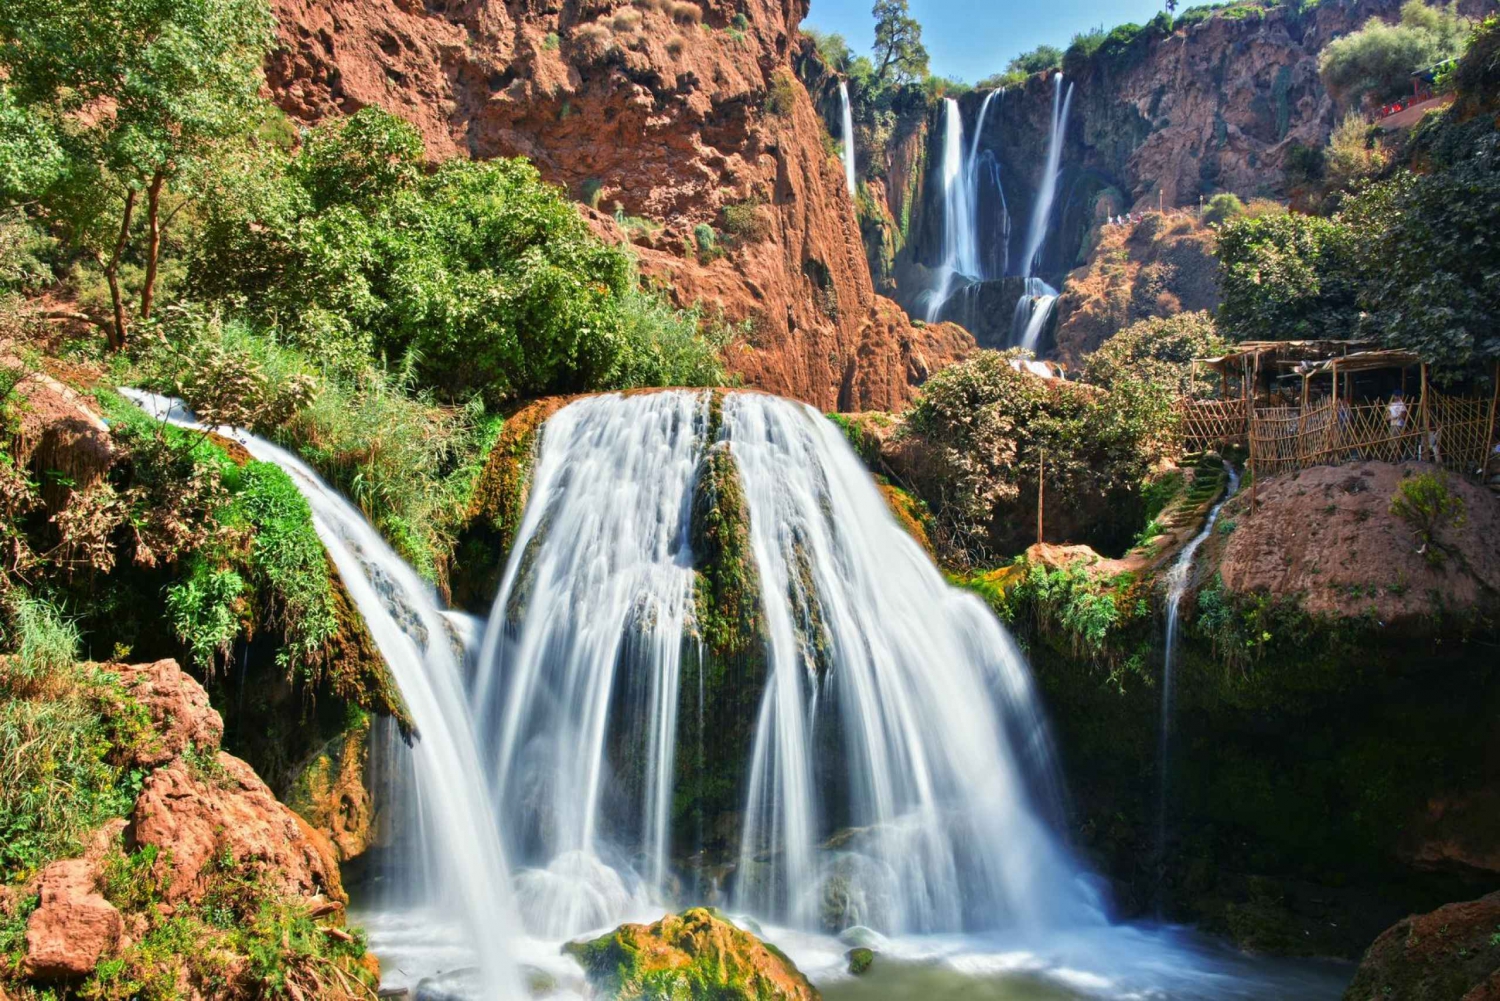 From Marrakech: Ouzoud Waterfalls Full-Day Private Trip